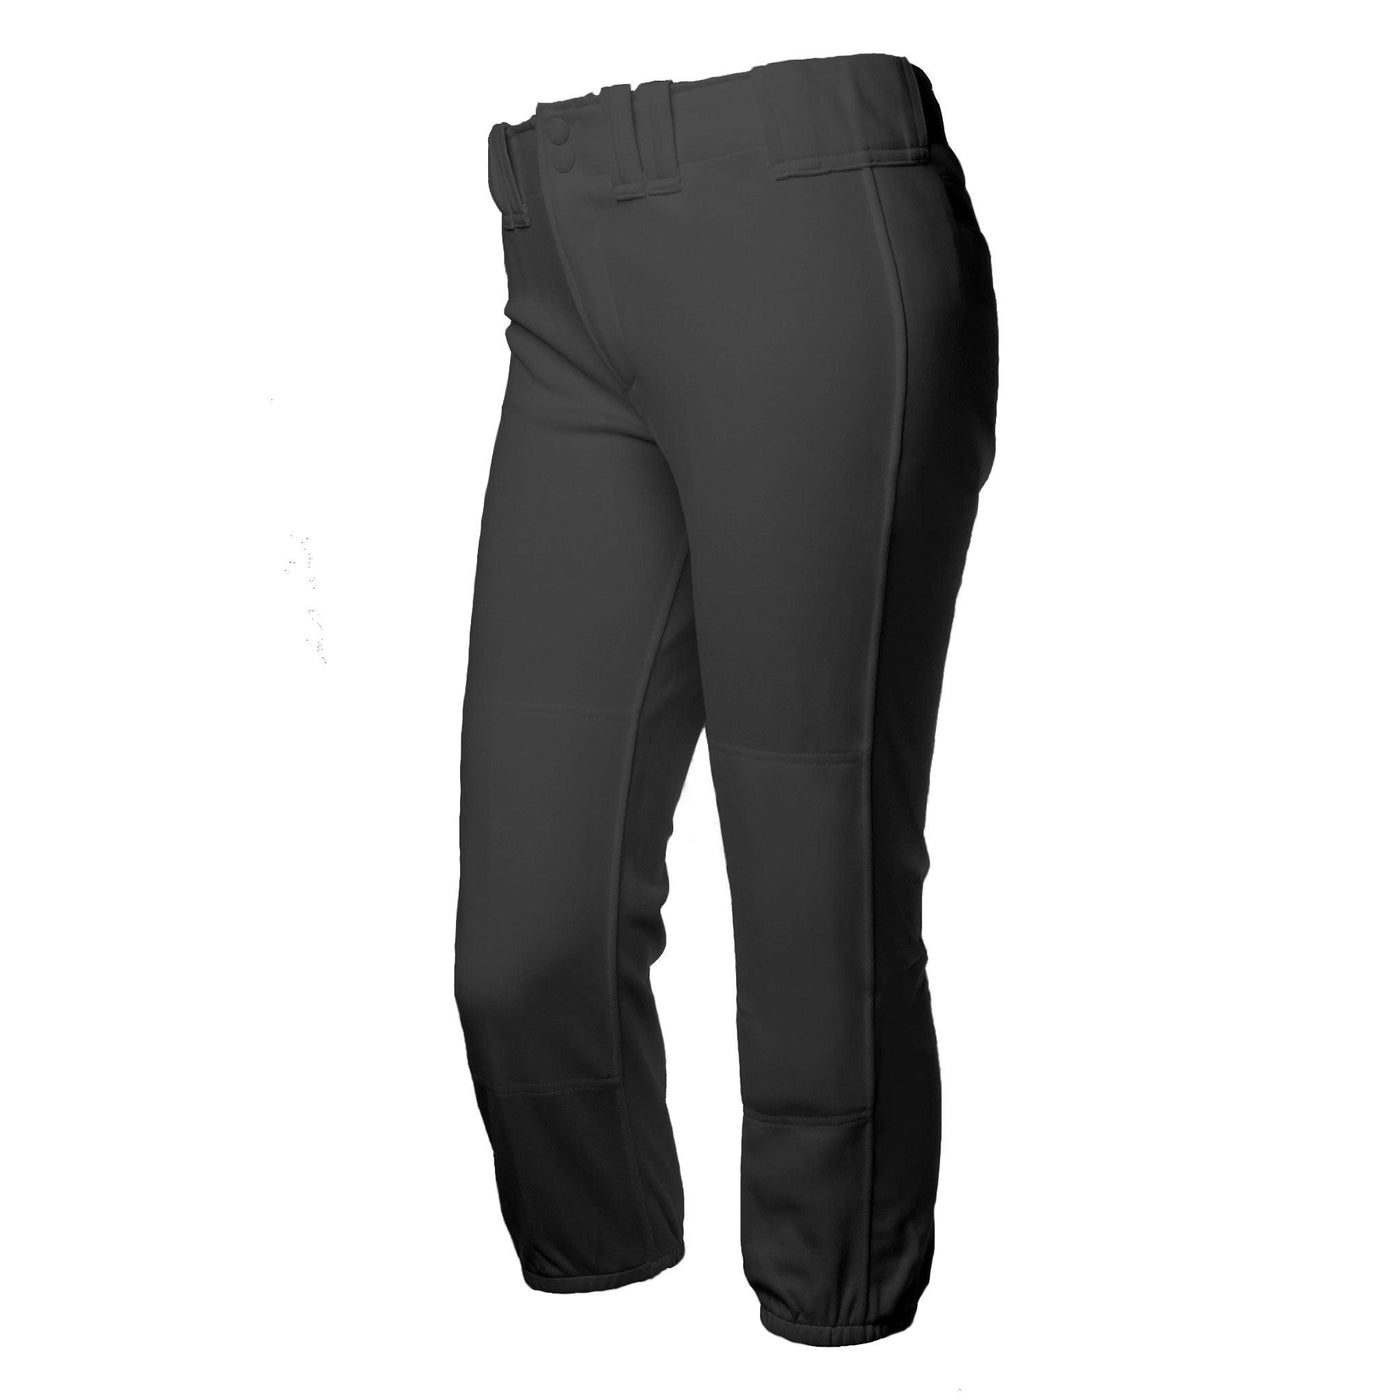 does anyone know how to stretch out the thighs on softball pants? we just  got our new game pants and they're suffocating me. i'm worried it's gonna  mess up my pitching. 